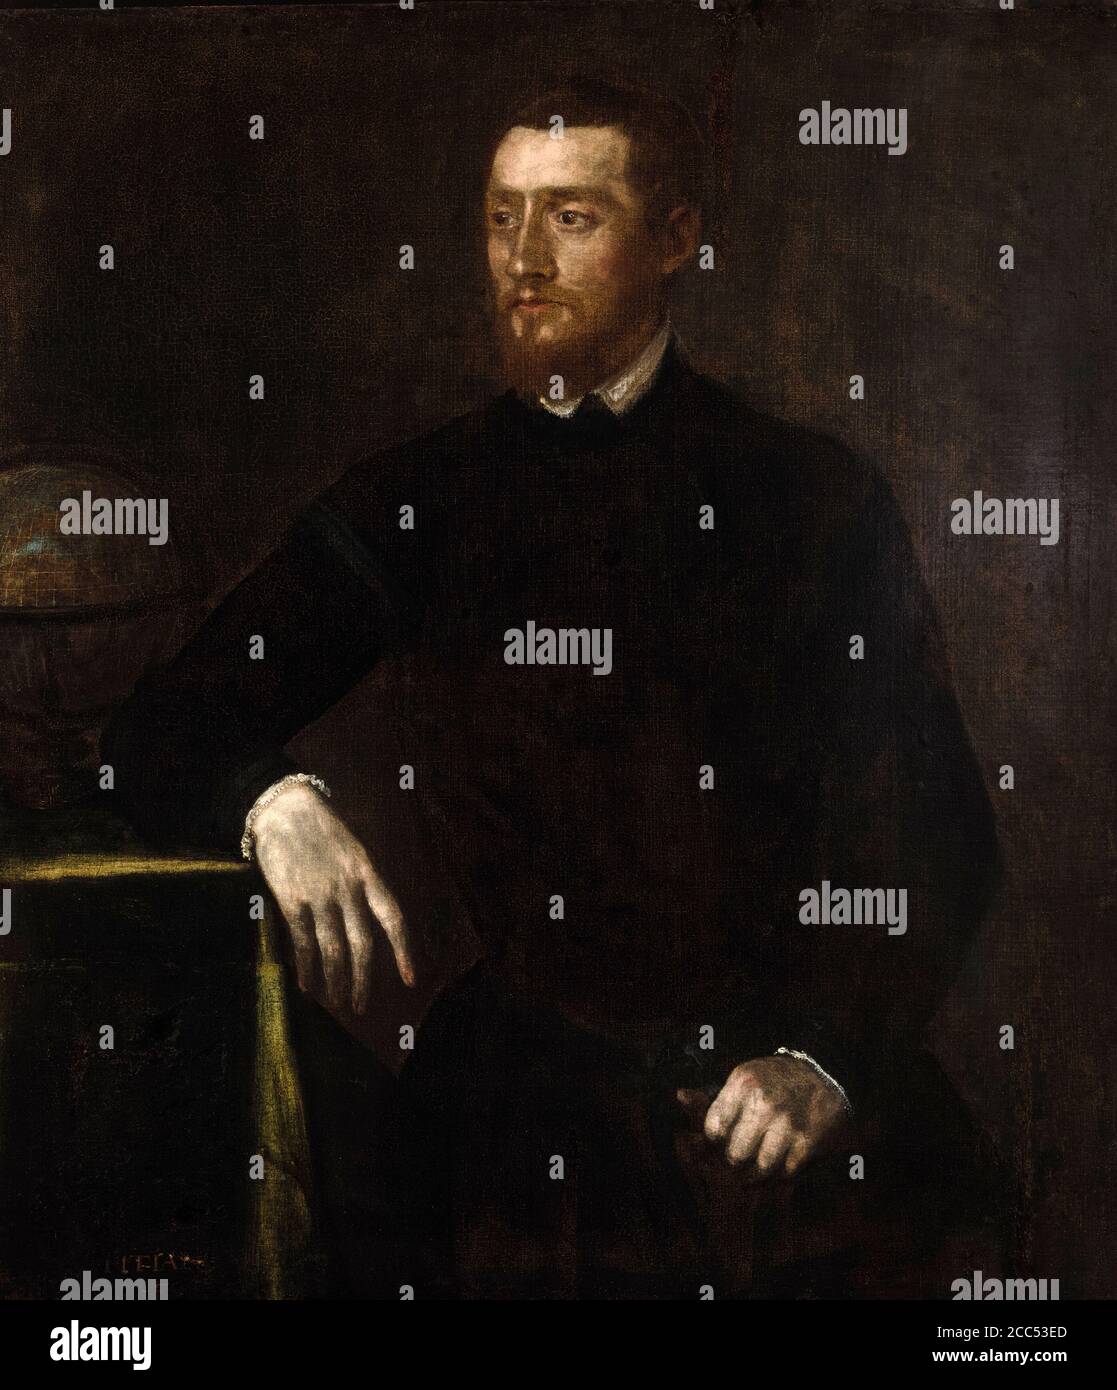 Geradus Mercator (1512-1594), 16th Century geographer, cosmographer and cartographer, portrait painting by the Workshop of Titian, circa 1550 Stock Photo